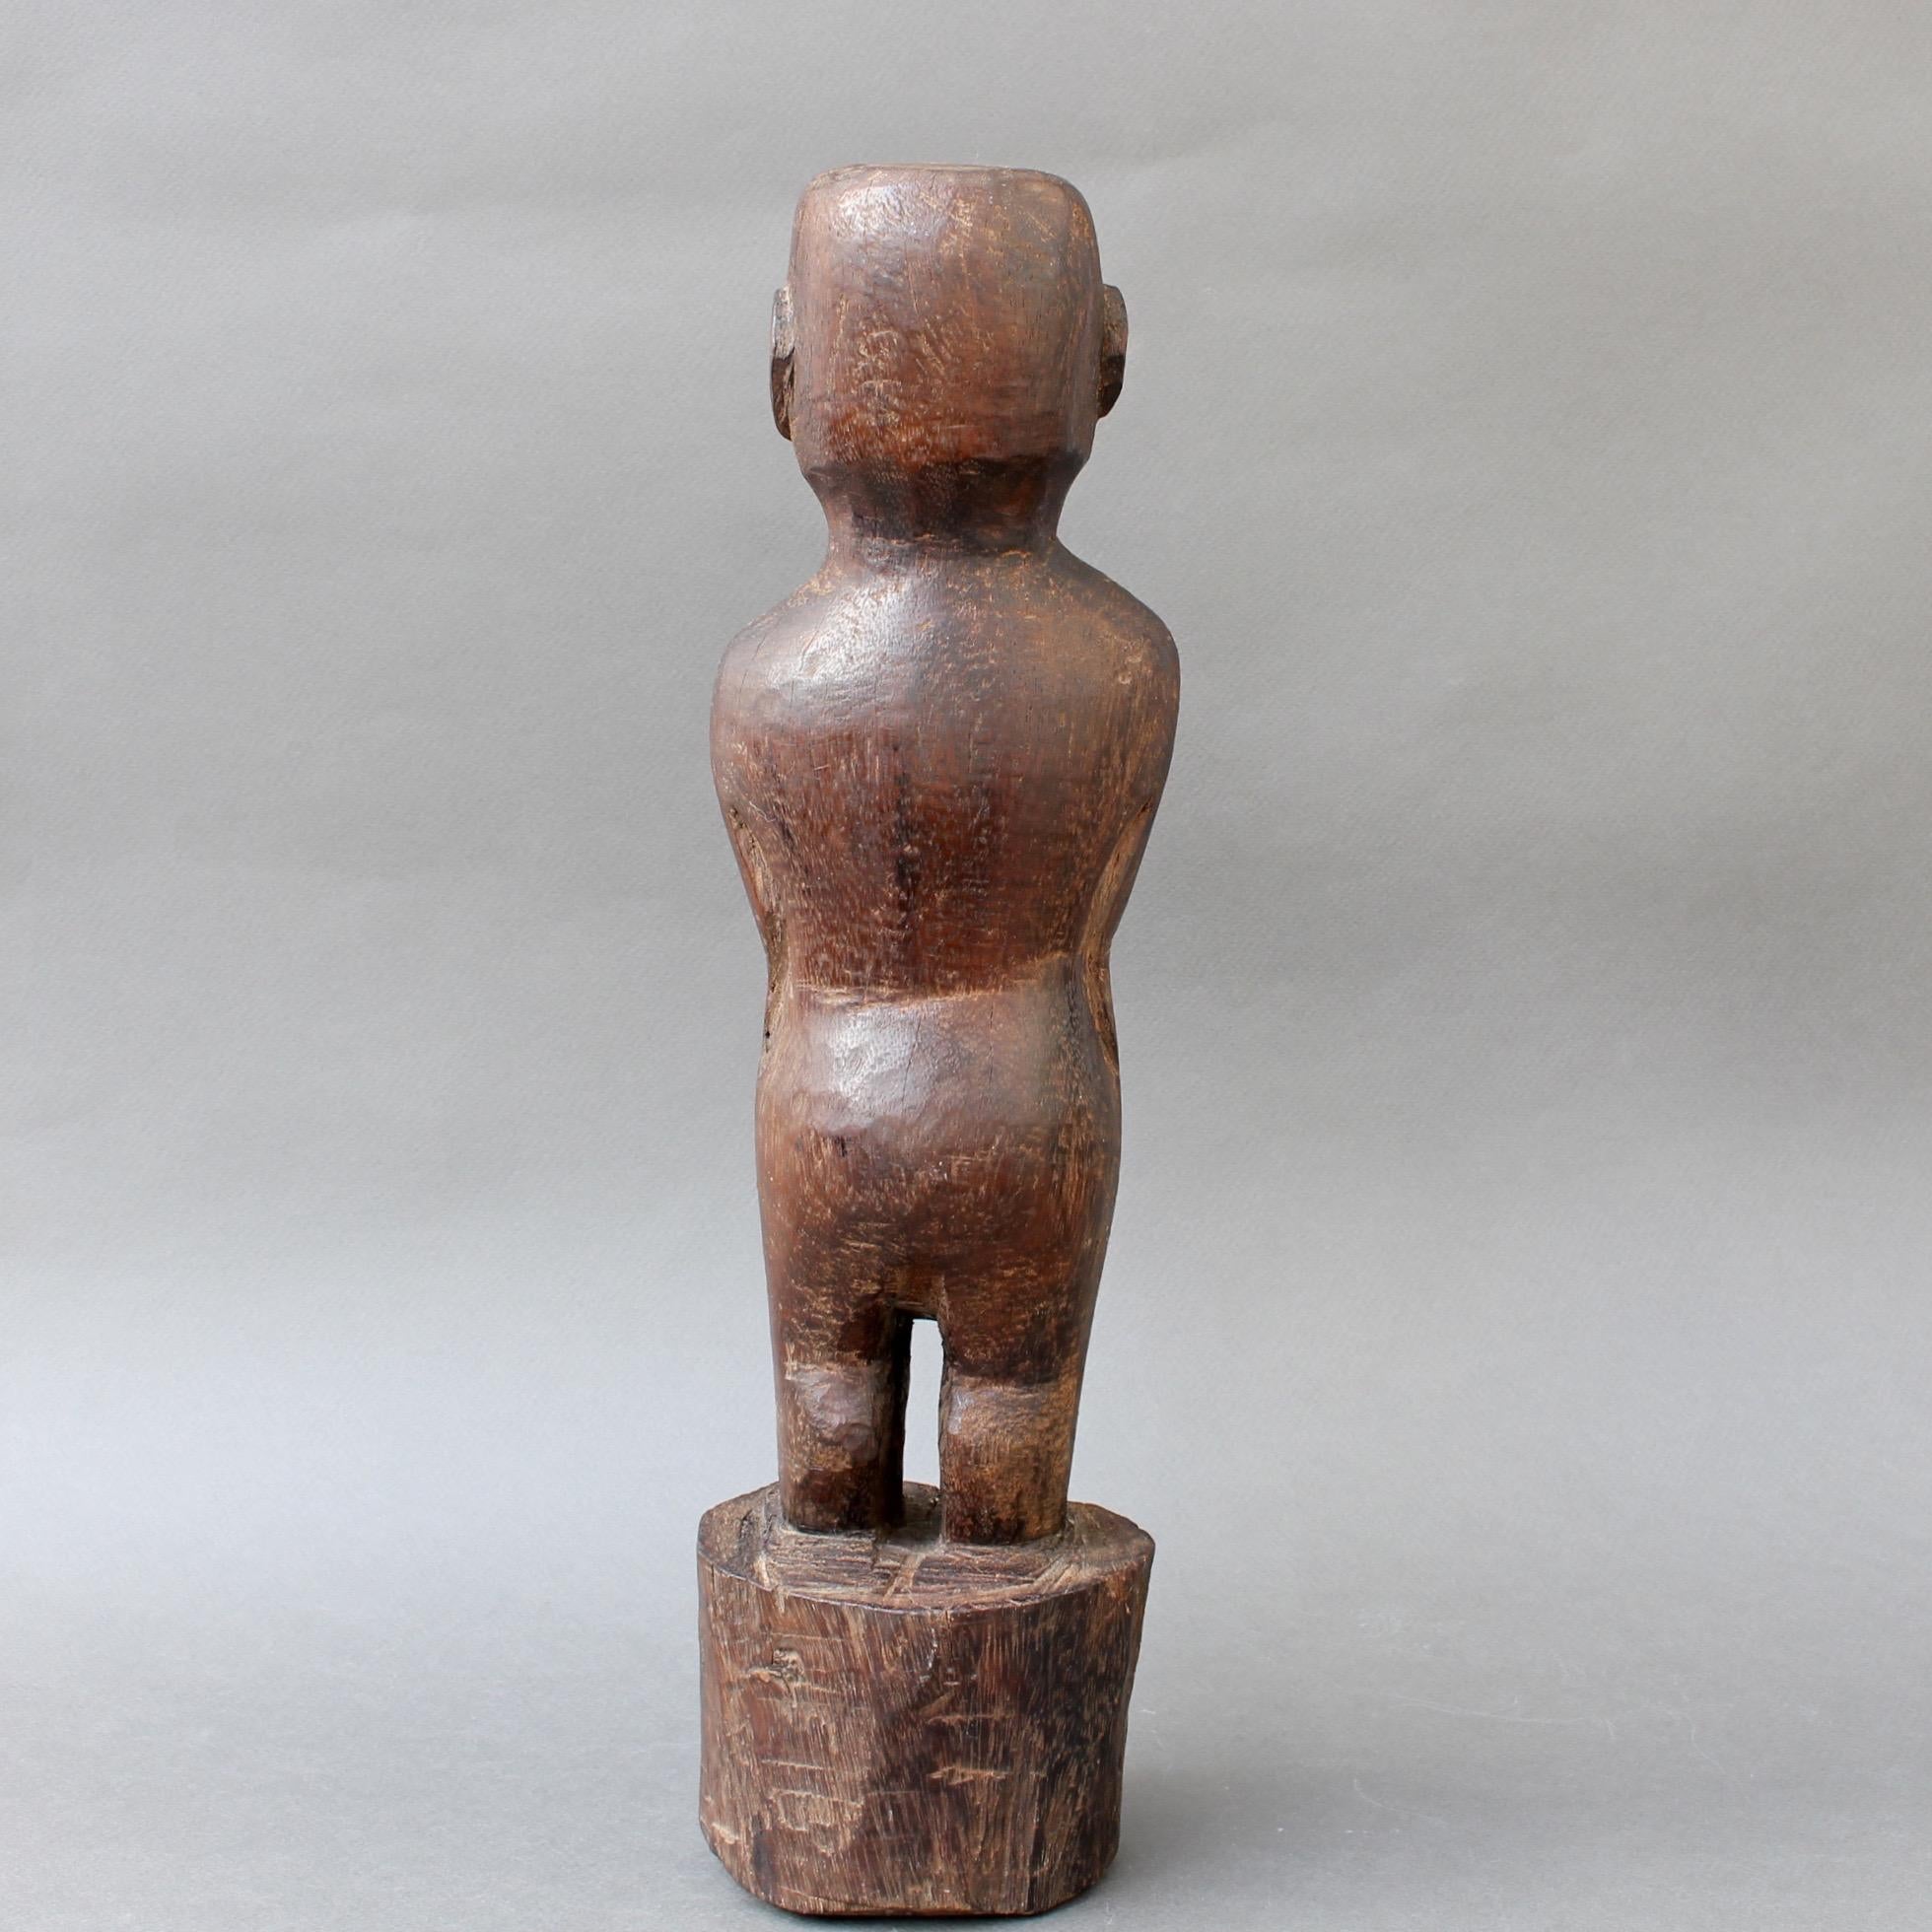 Indonesian Wooden Carving or Sculpture of Standing Ancestral Figure from Timor, Indonesia